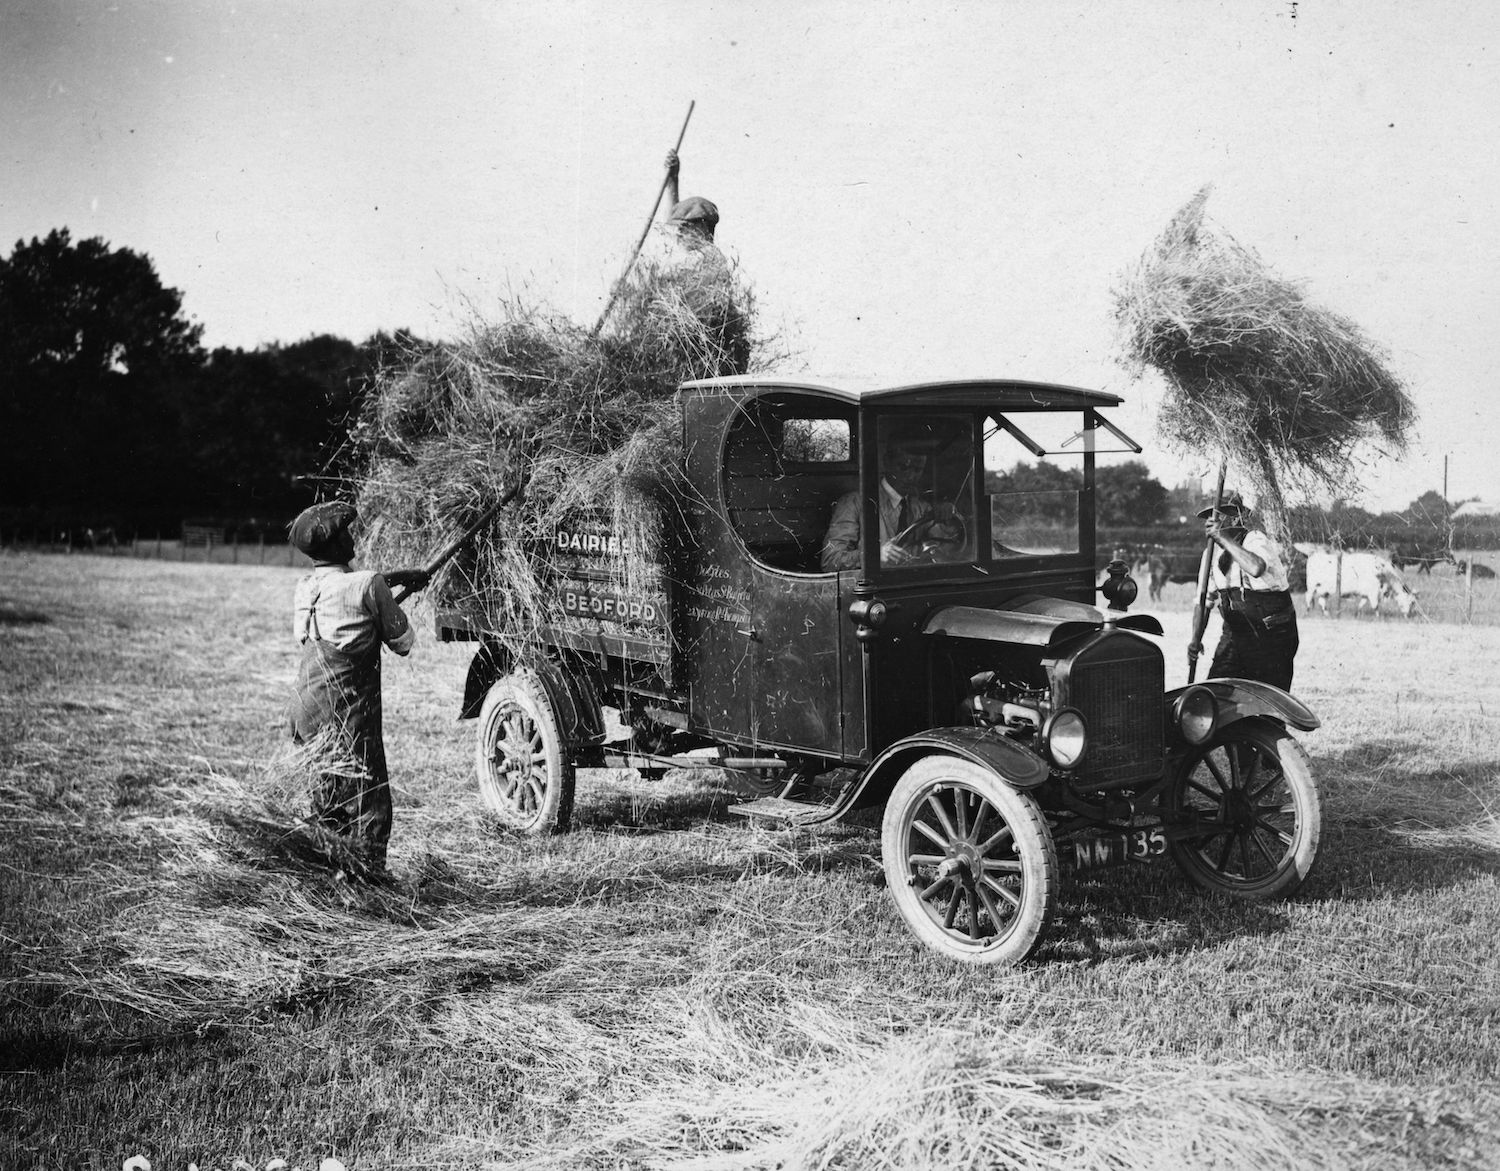 Pitching hay into a Ford Model T Pickup truck | Topical Press Agency/Getty Images